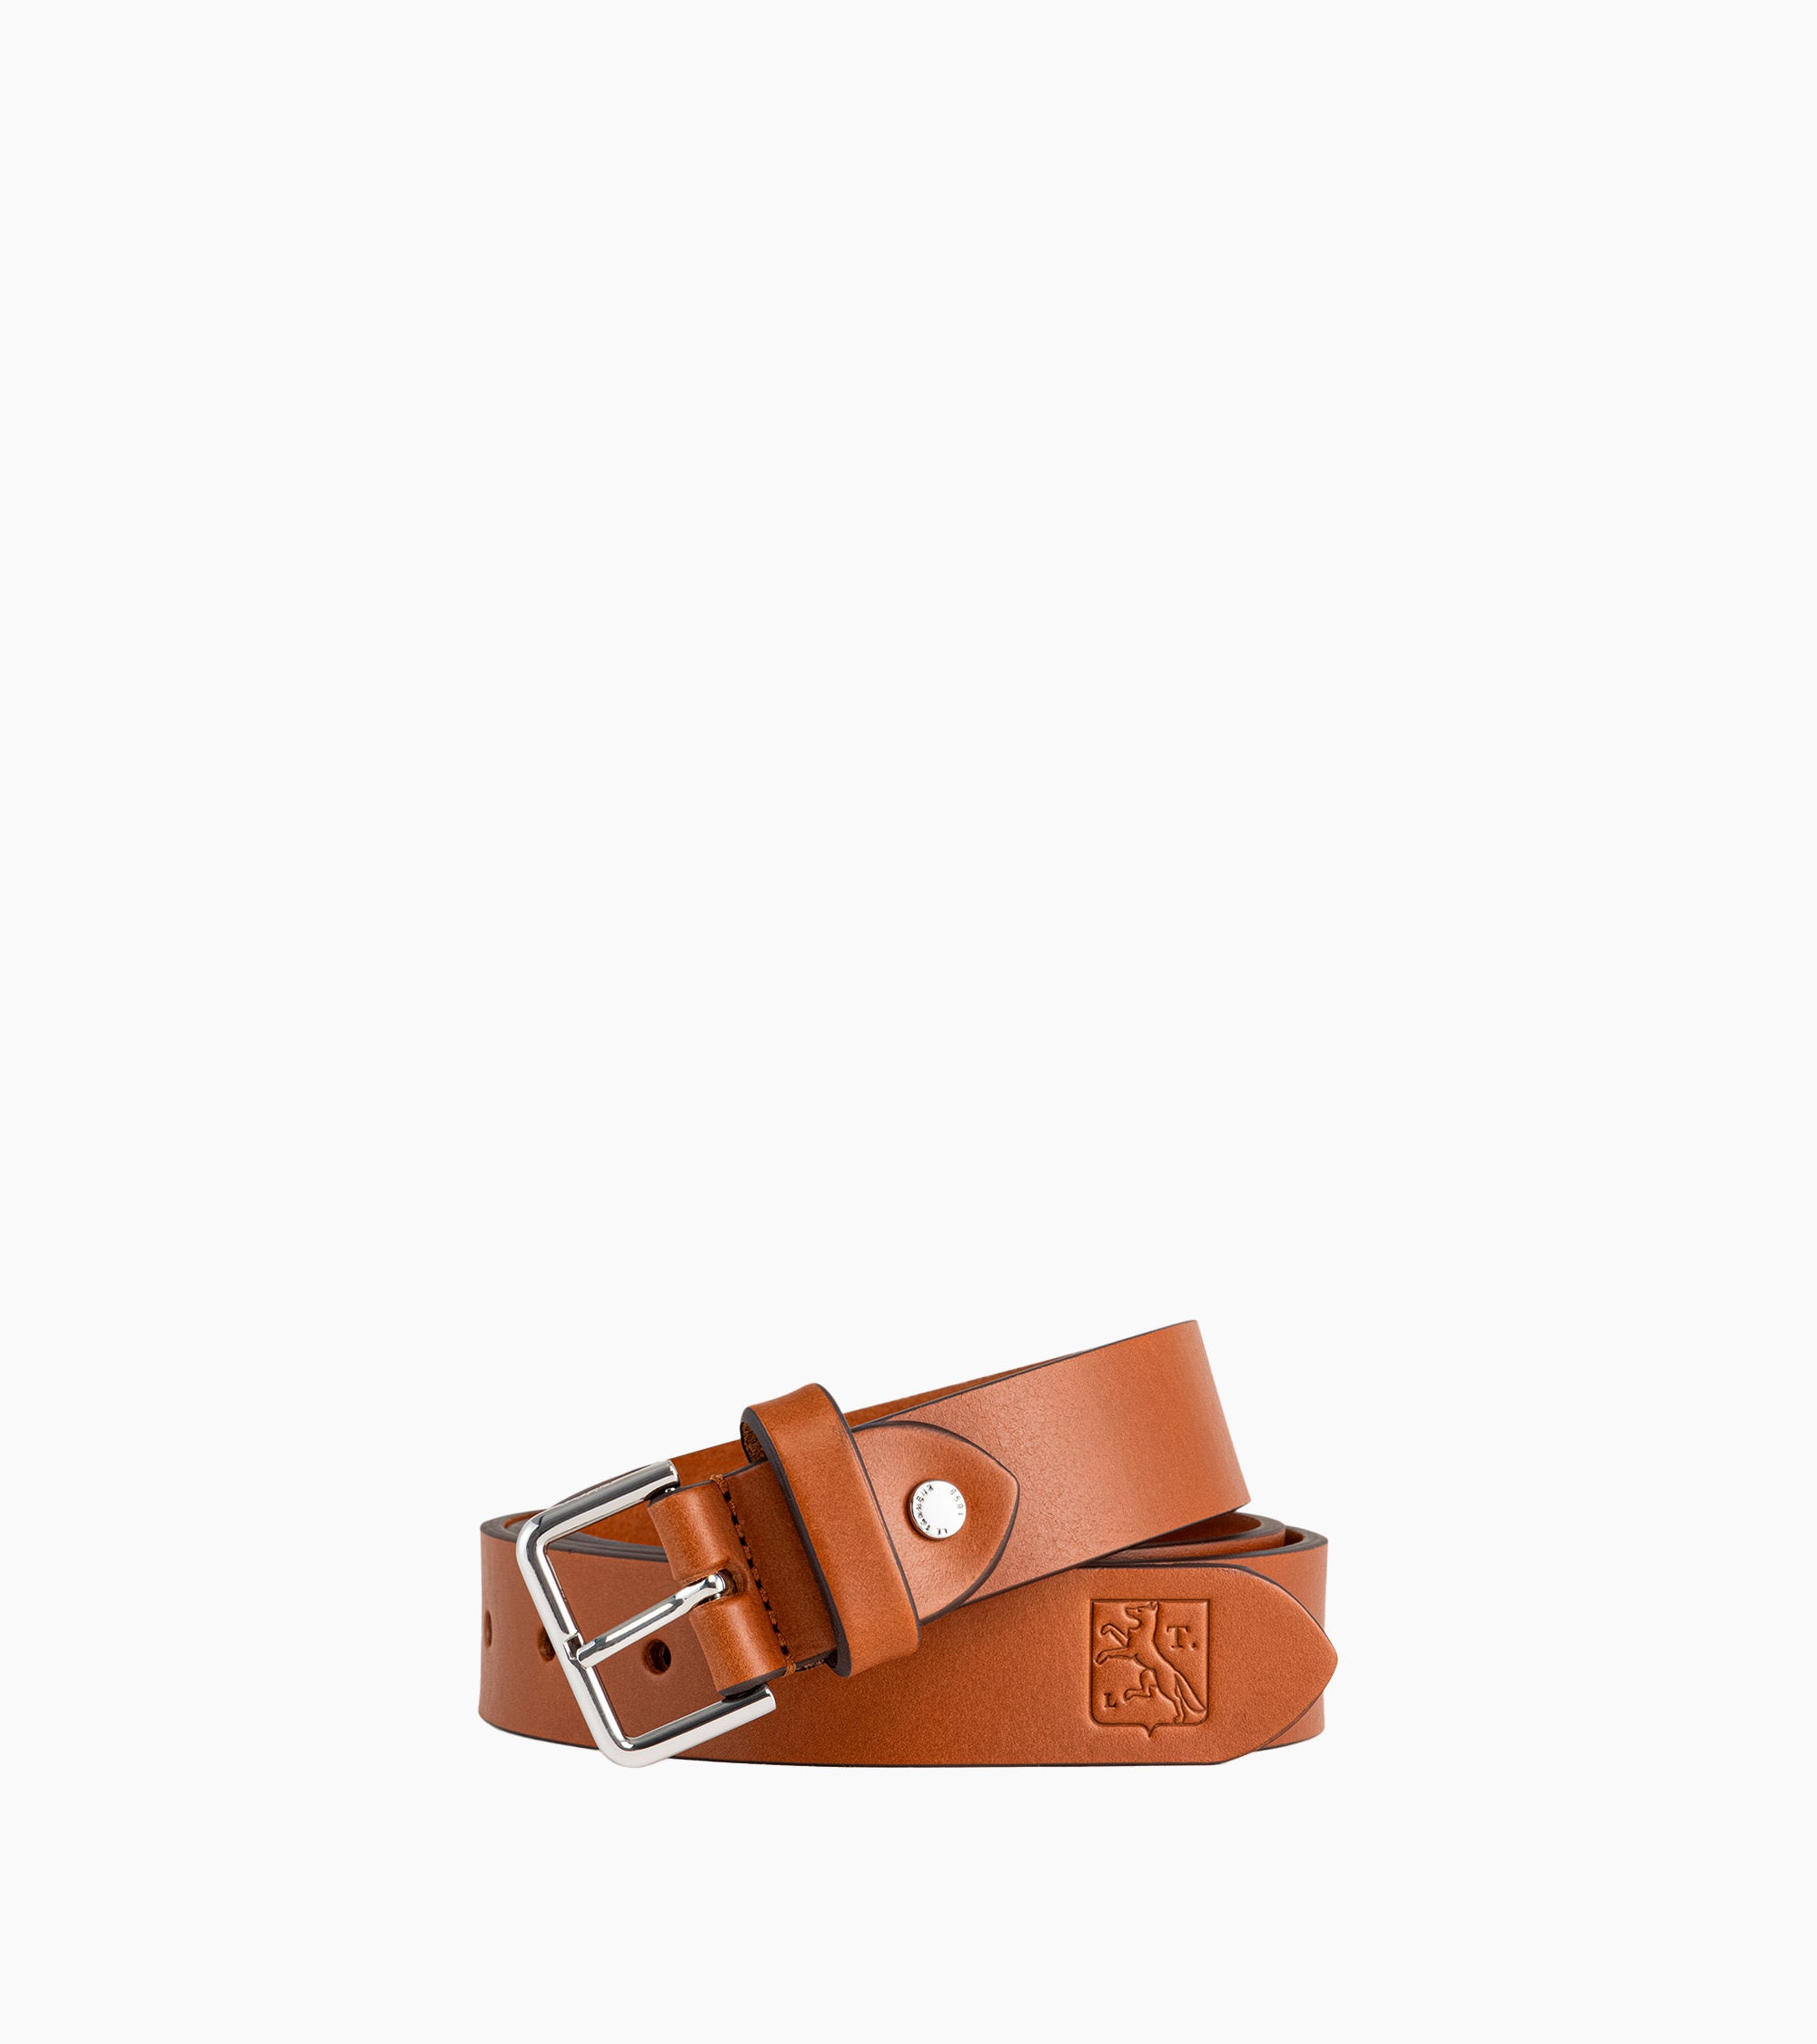 Men's belt with square buckle in smooth leather